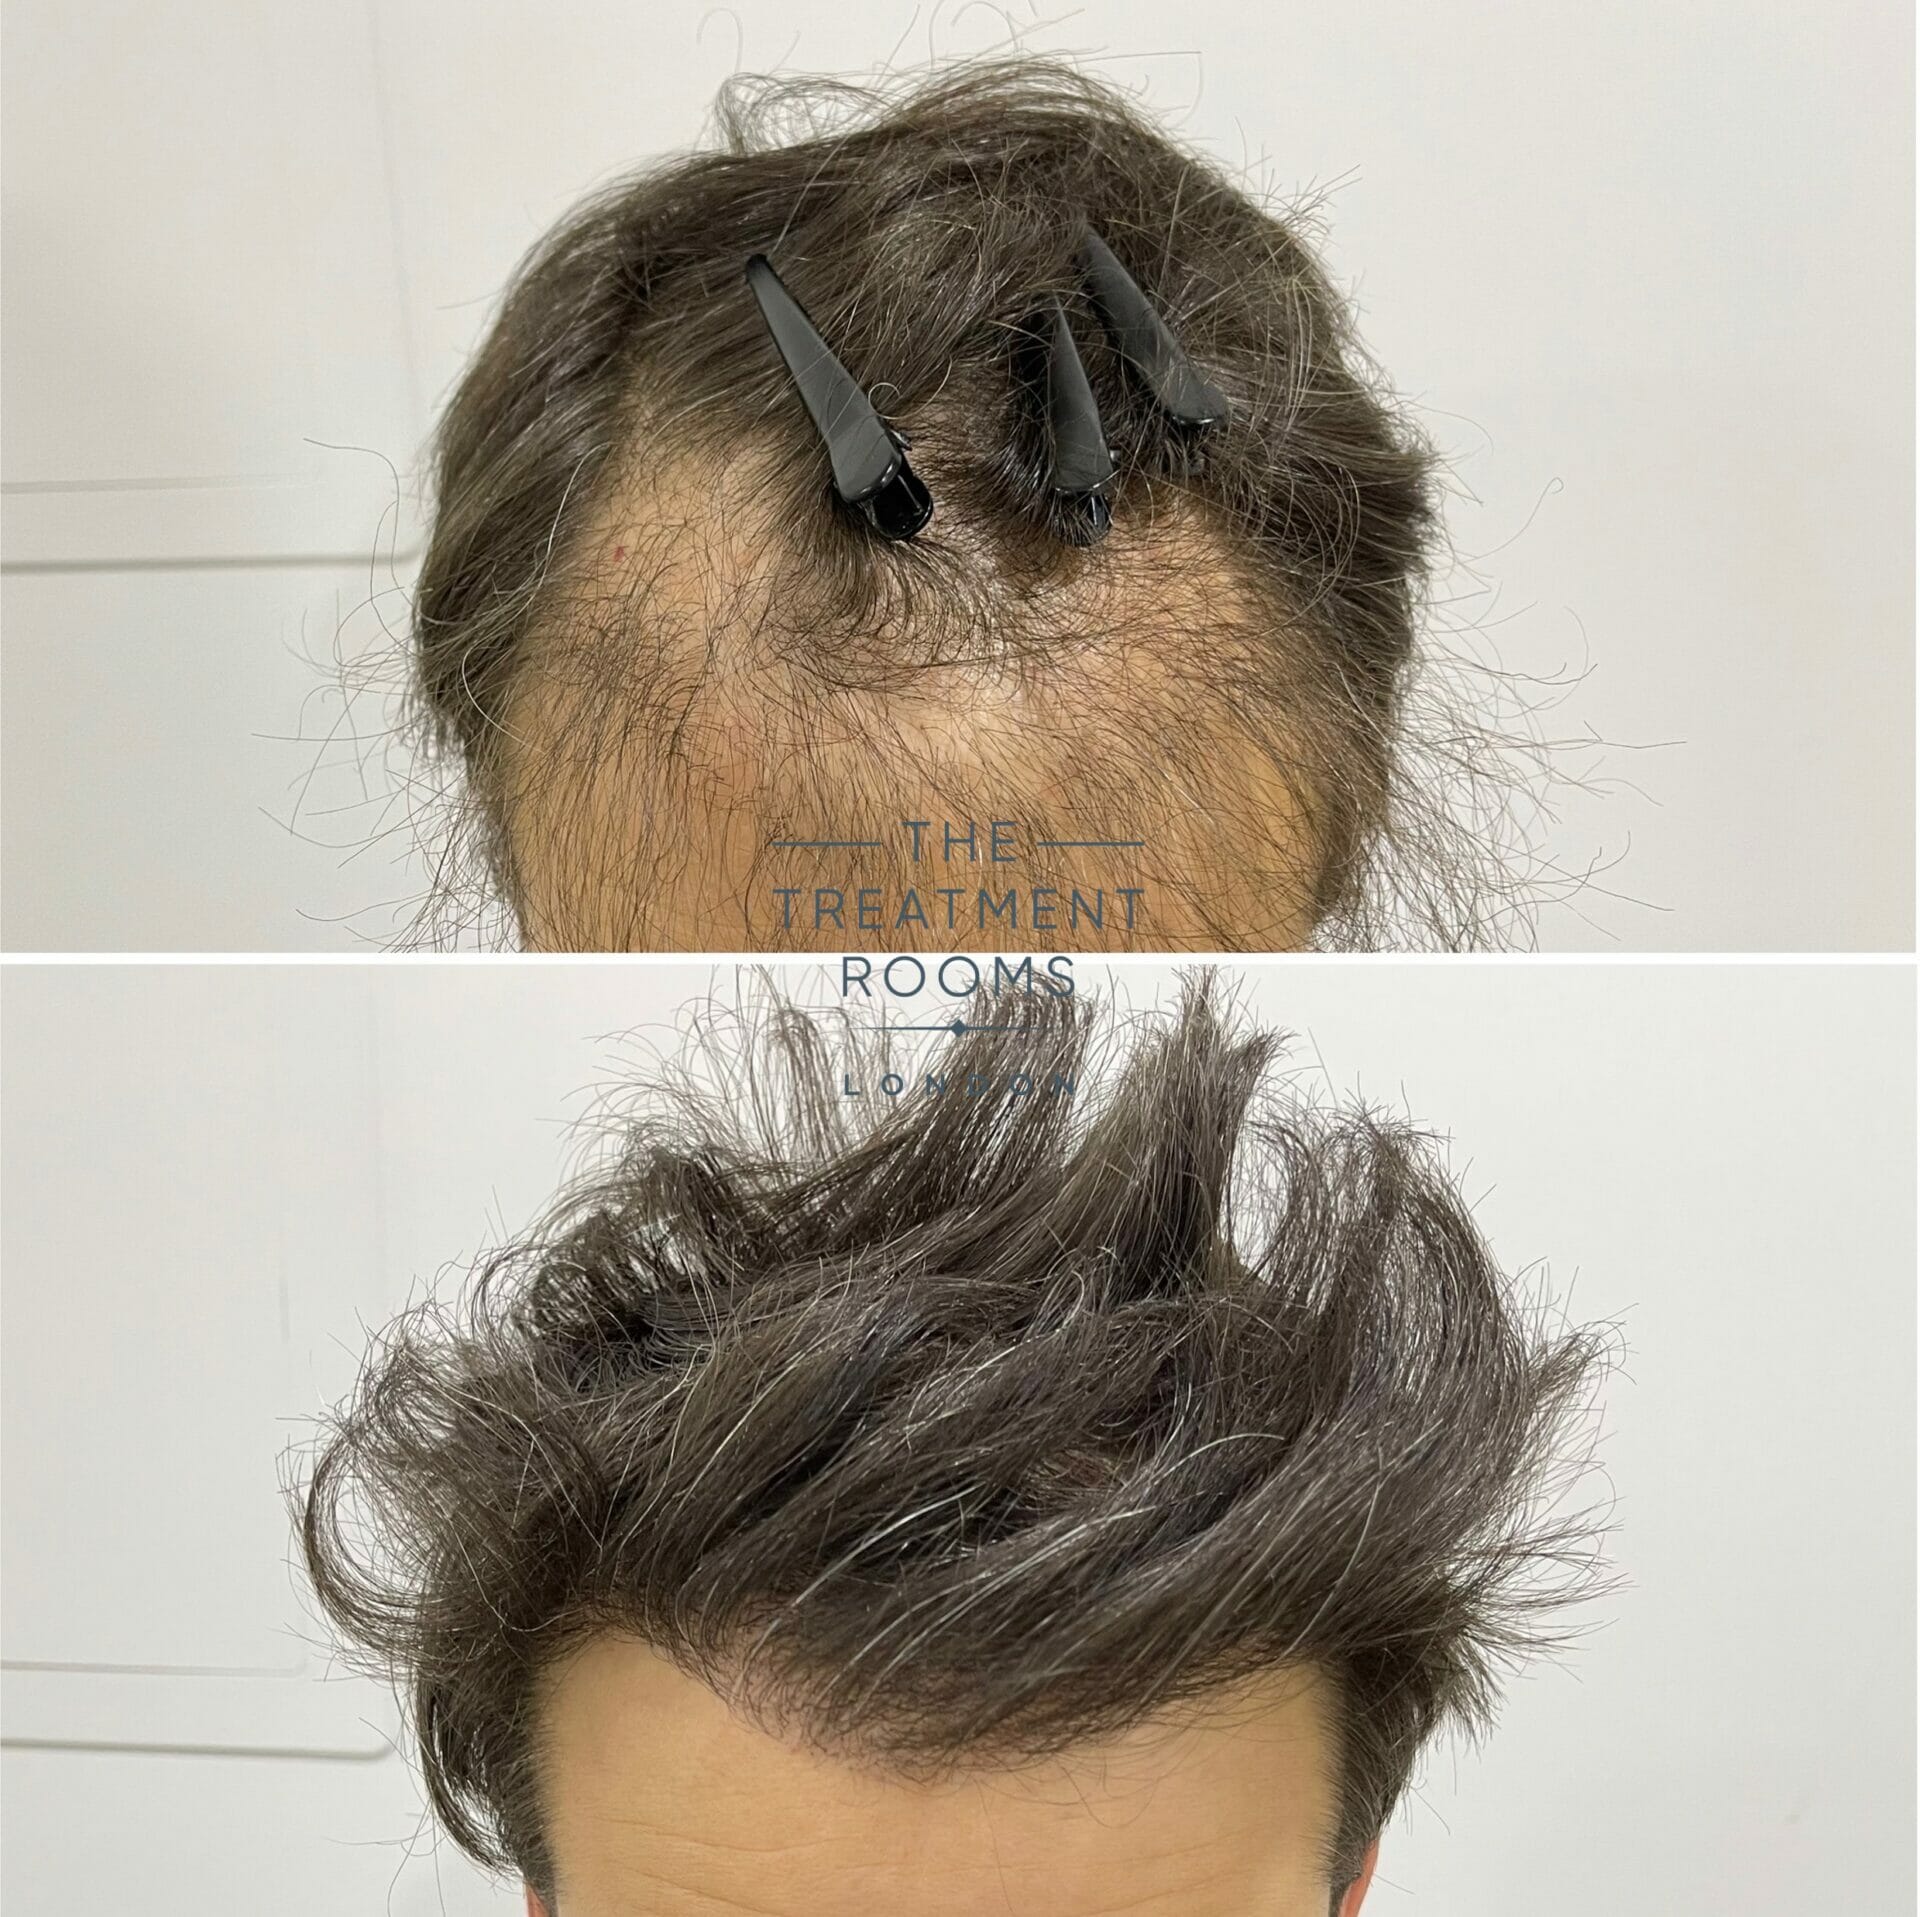 Is A Hair Transplant Permanent? | FUE Hair Transplant Clinic